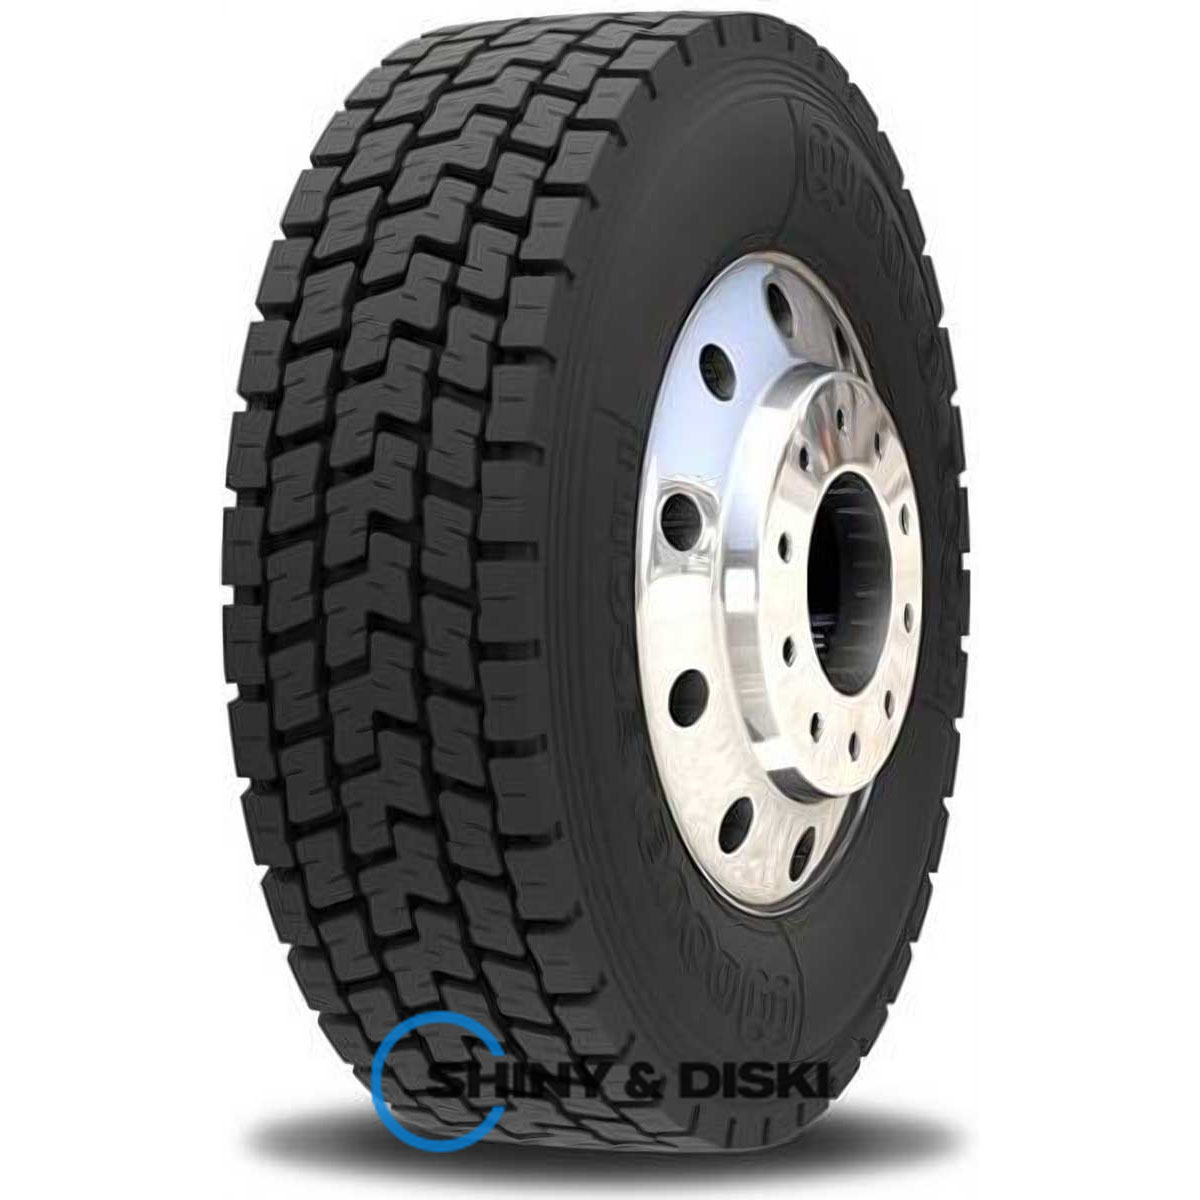 double coin rlb450 (ведущая ось) 315/80 r22.5 156/152l